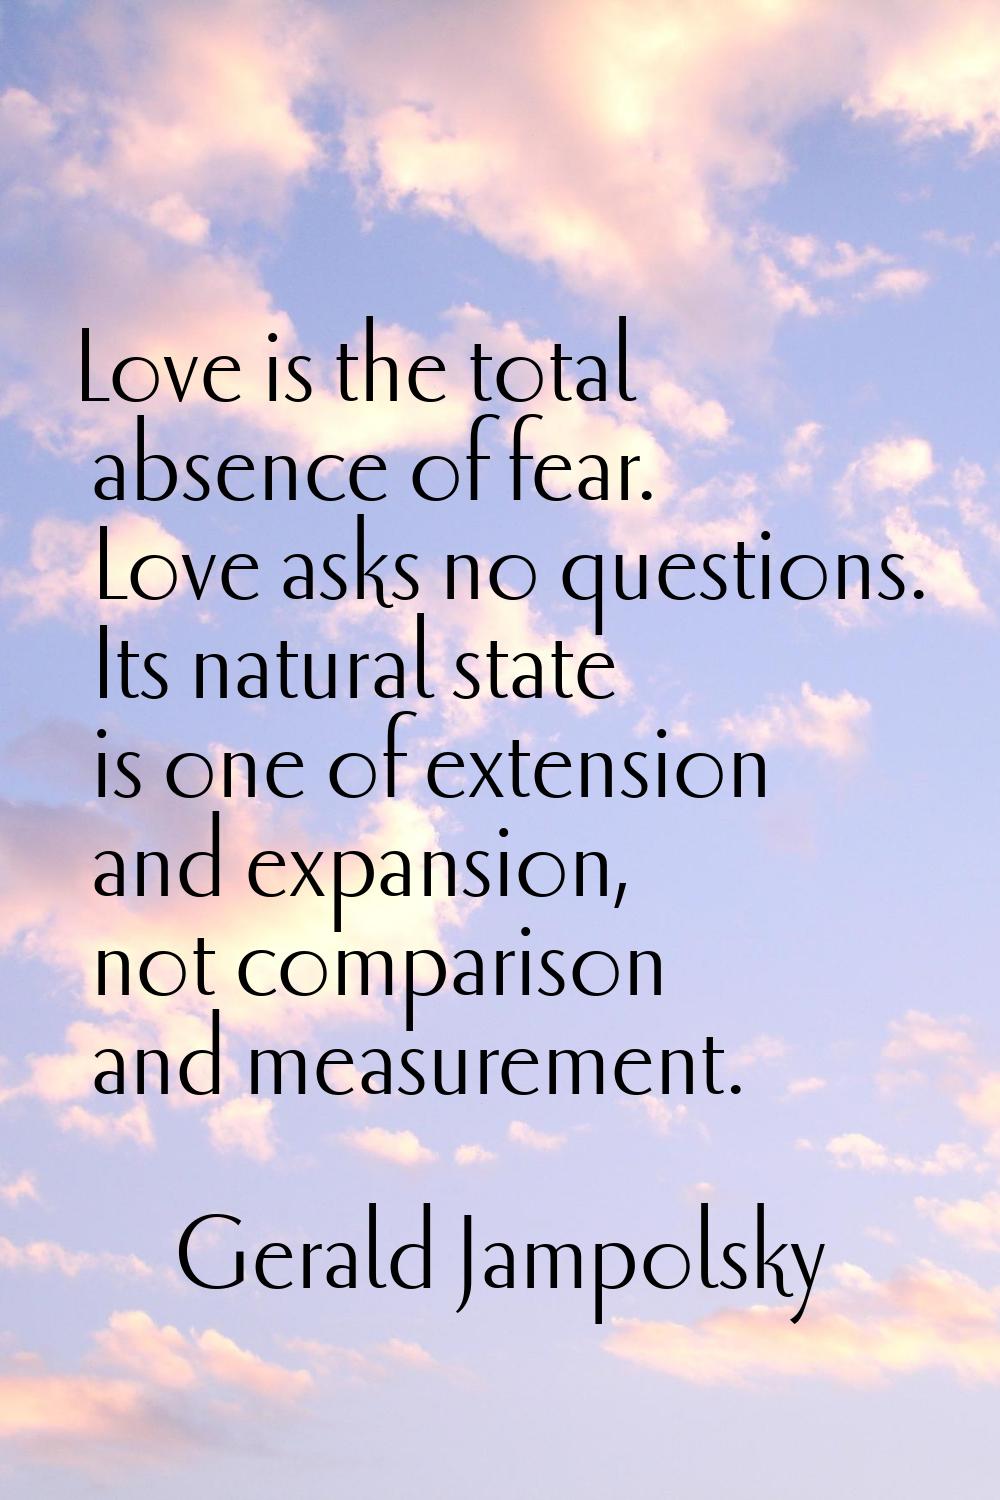 Love is the total absence of fear. Love asks no questions. Its natural state is one of extension an